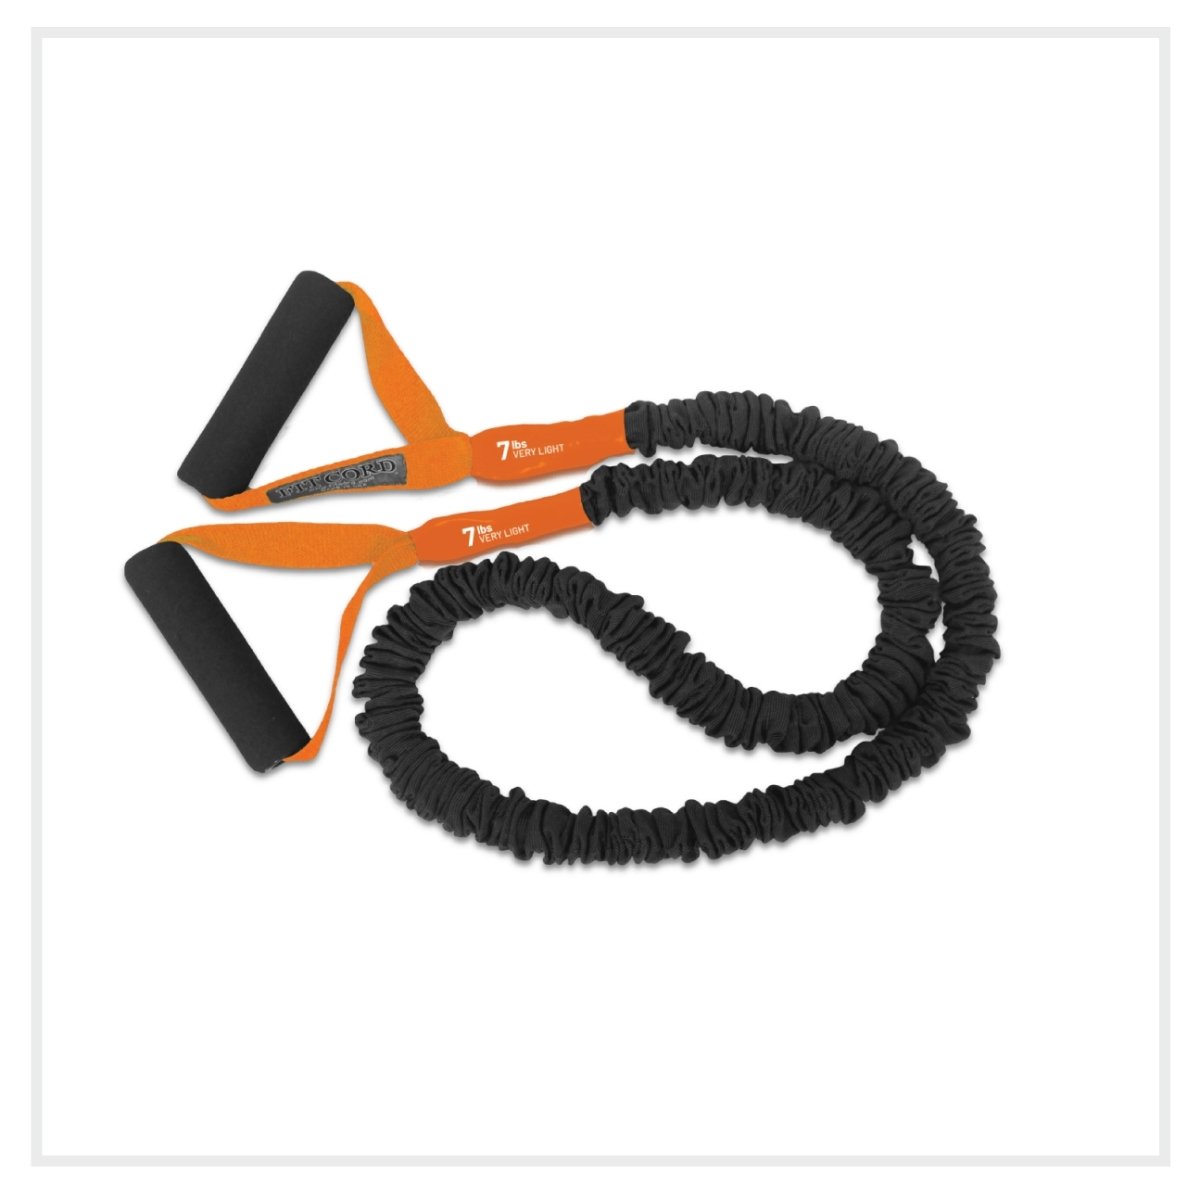 FitCord Resistance Band- Very Light (7lb)